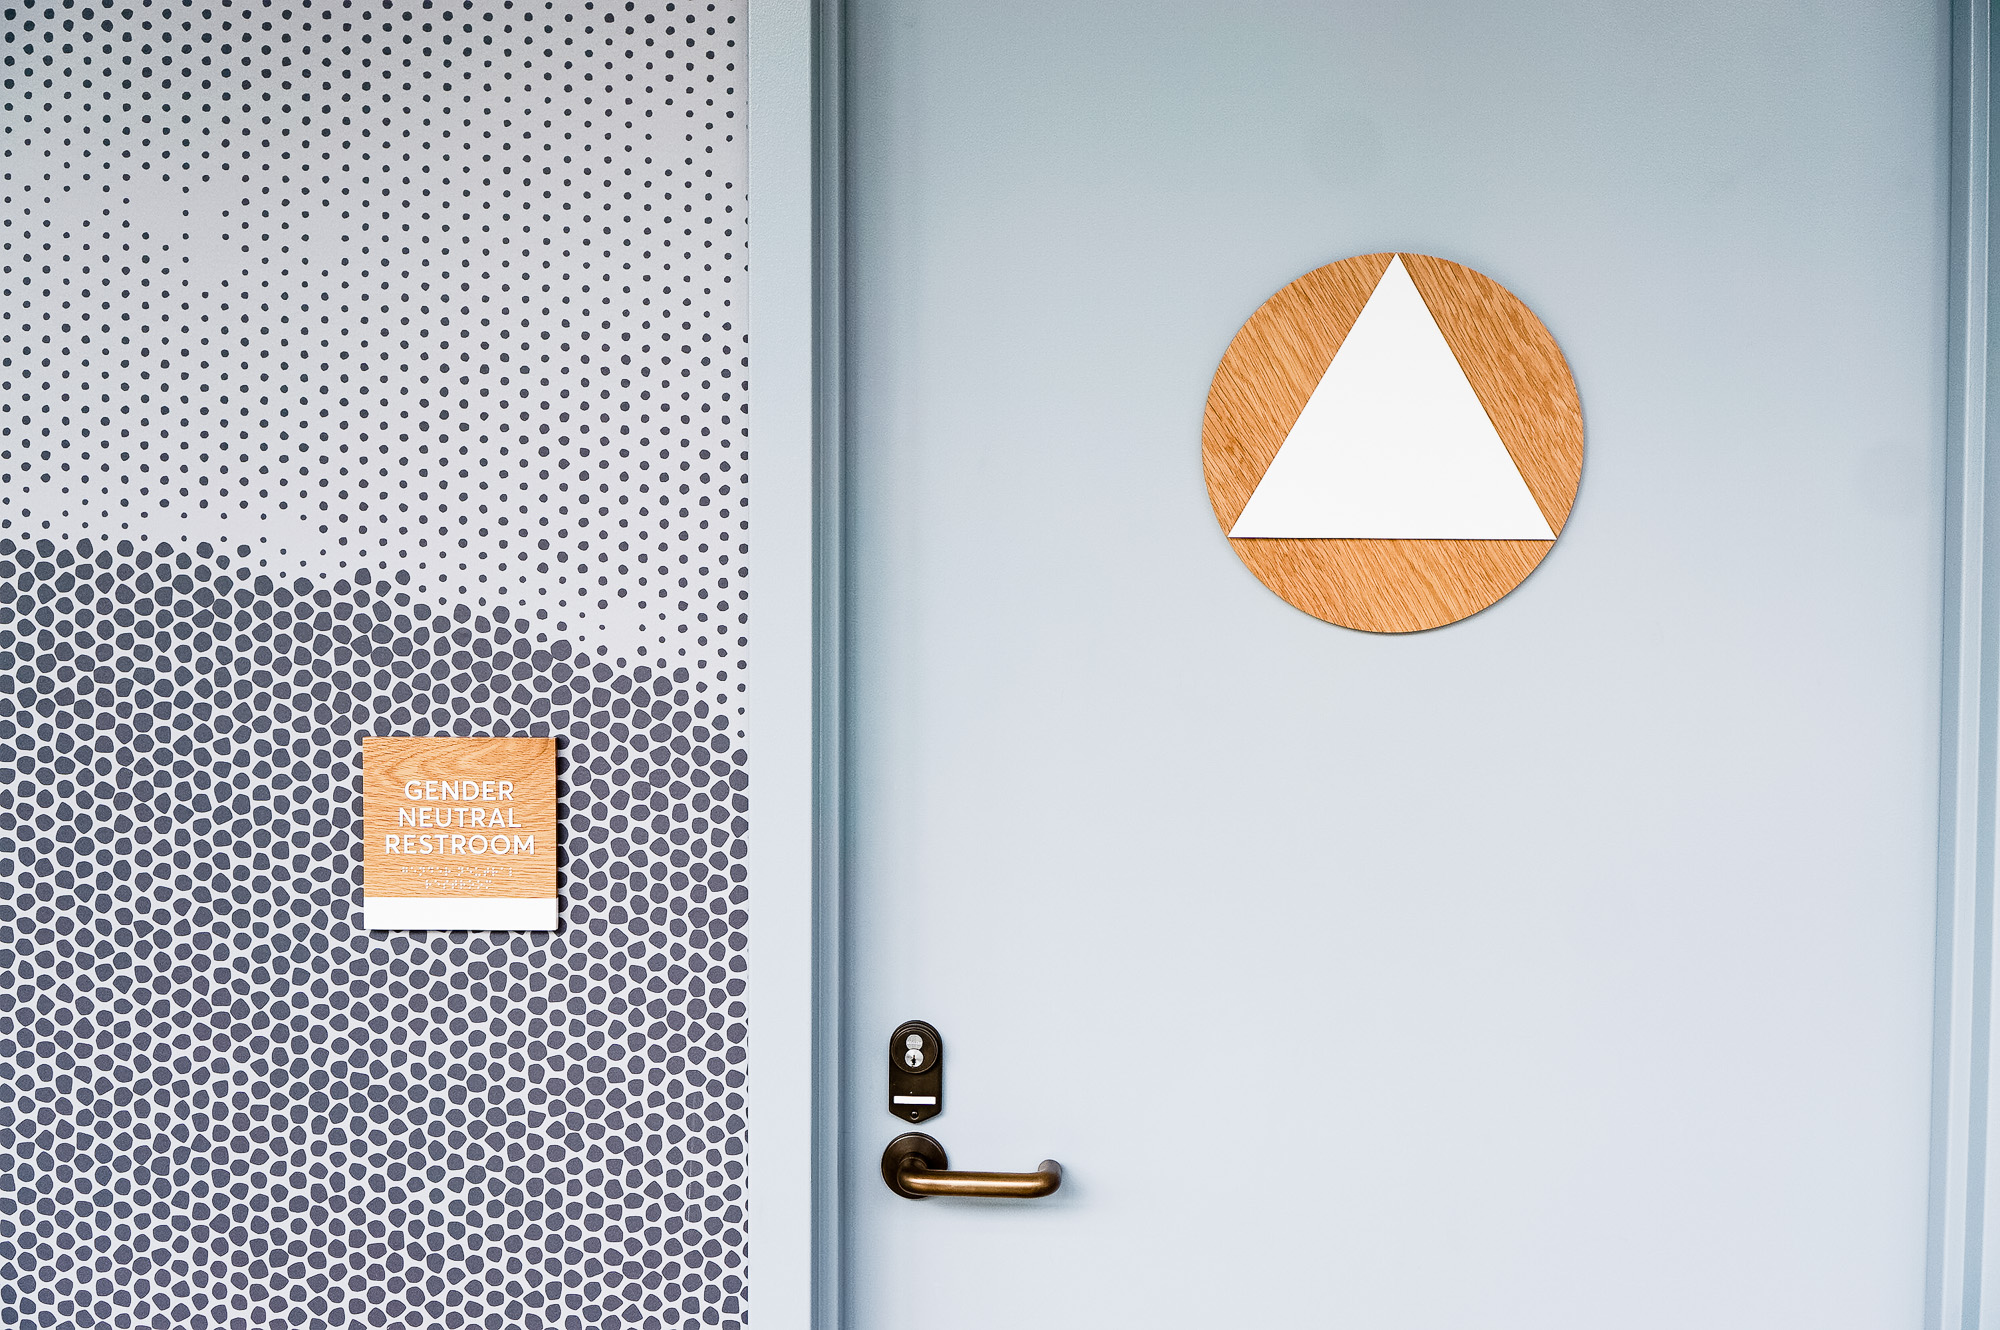 White-painted wood, California ADA signs for the office of Slack, a cloud-based set of proprietary team collaboration tools and services.